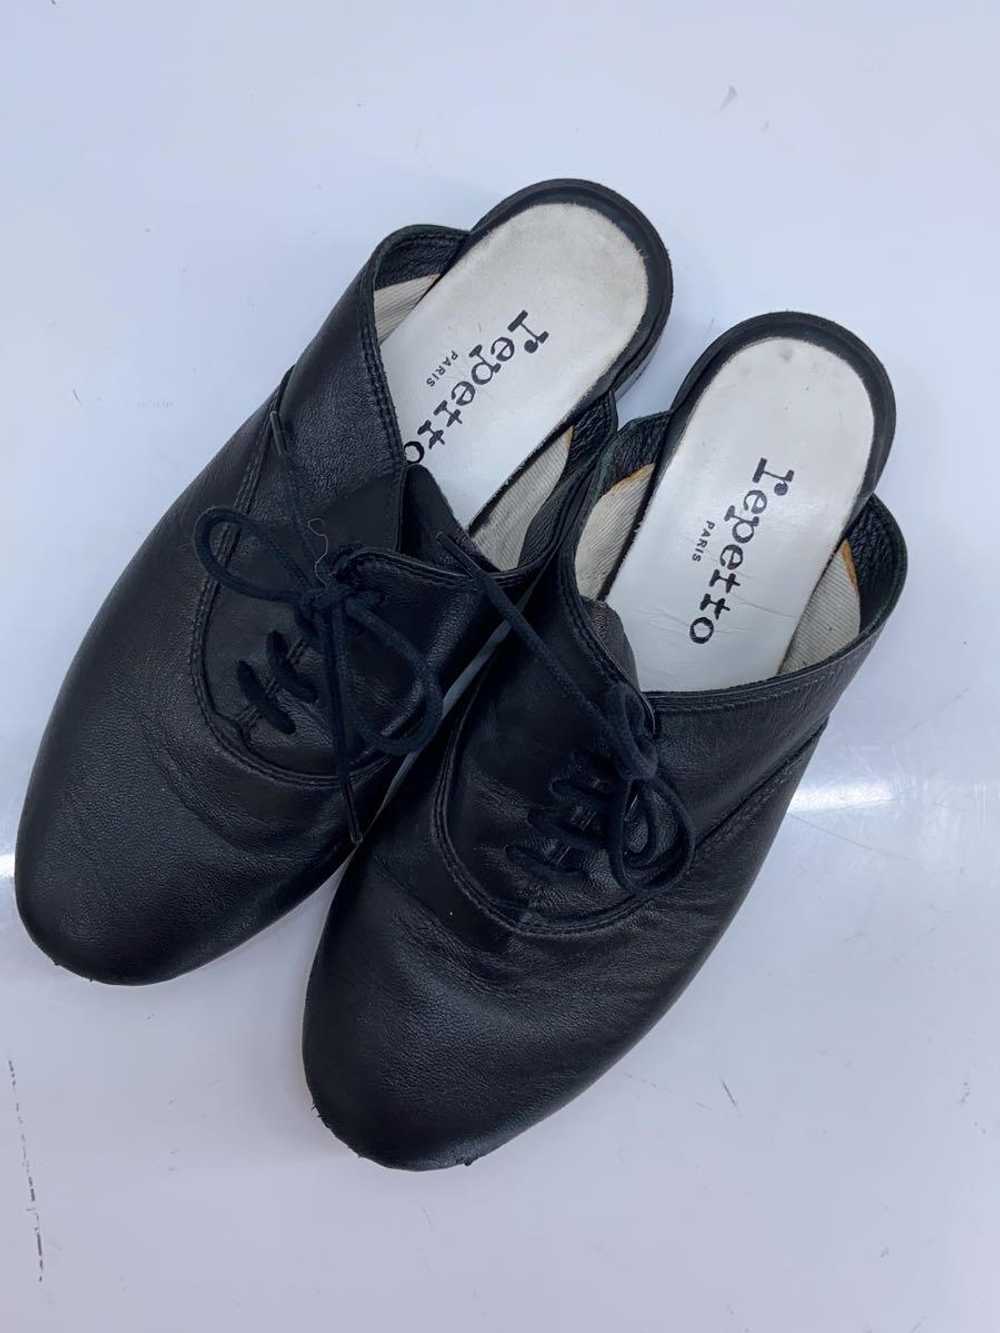 Repetto Mules/Shoes/35/Blk/Leather Shoes BbQ47 - image 2